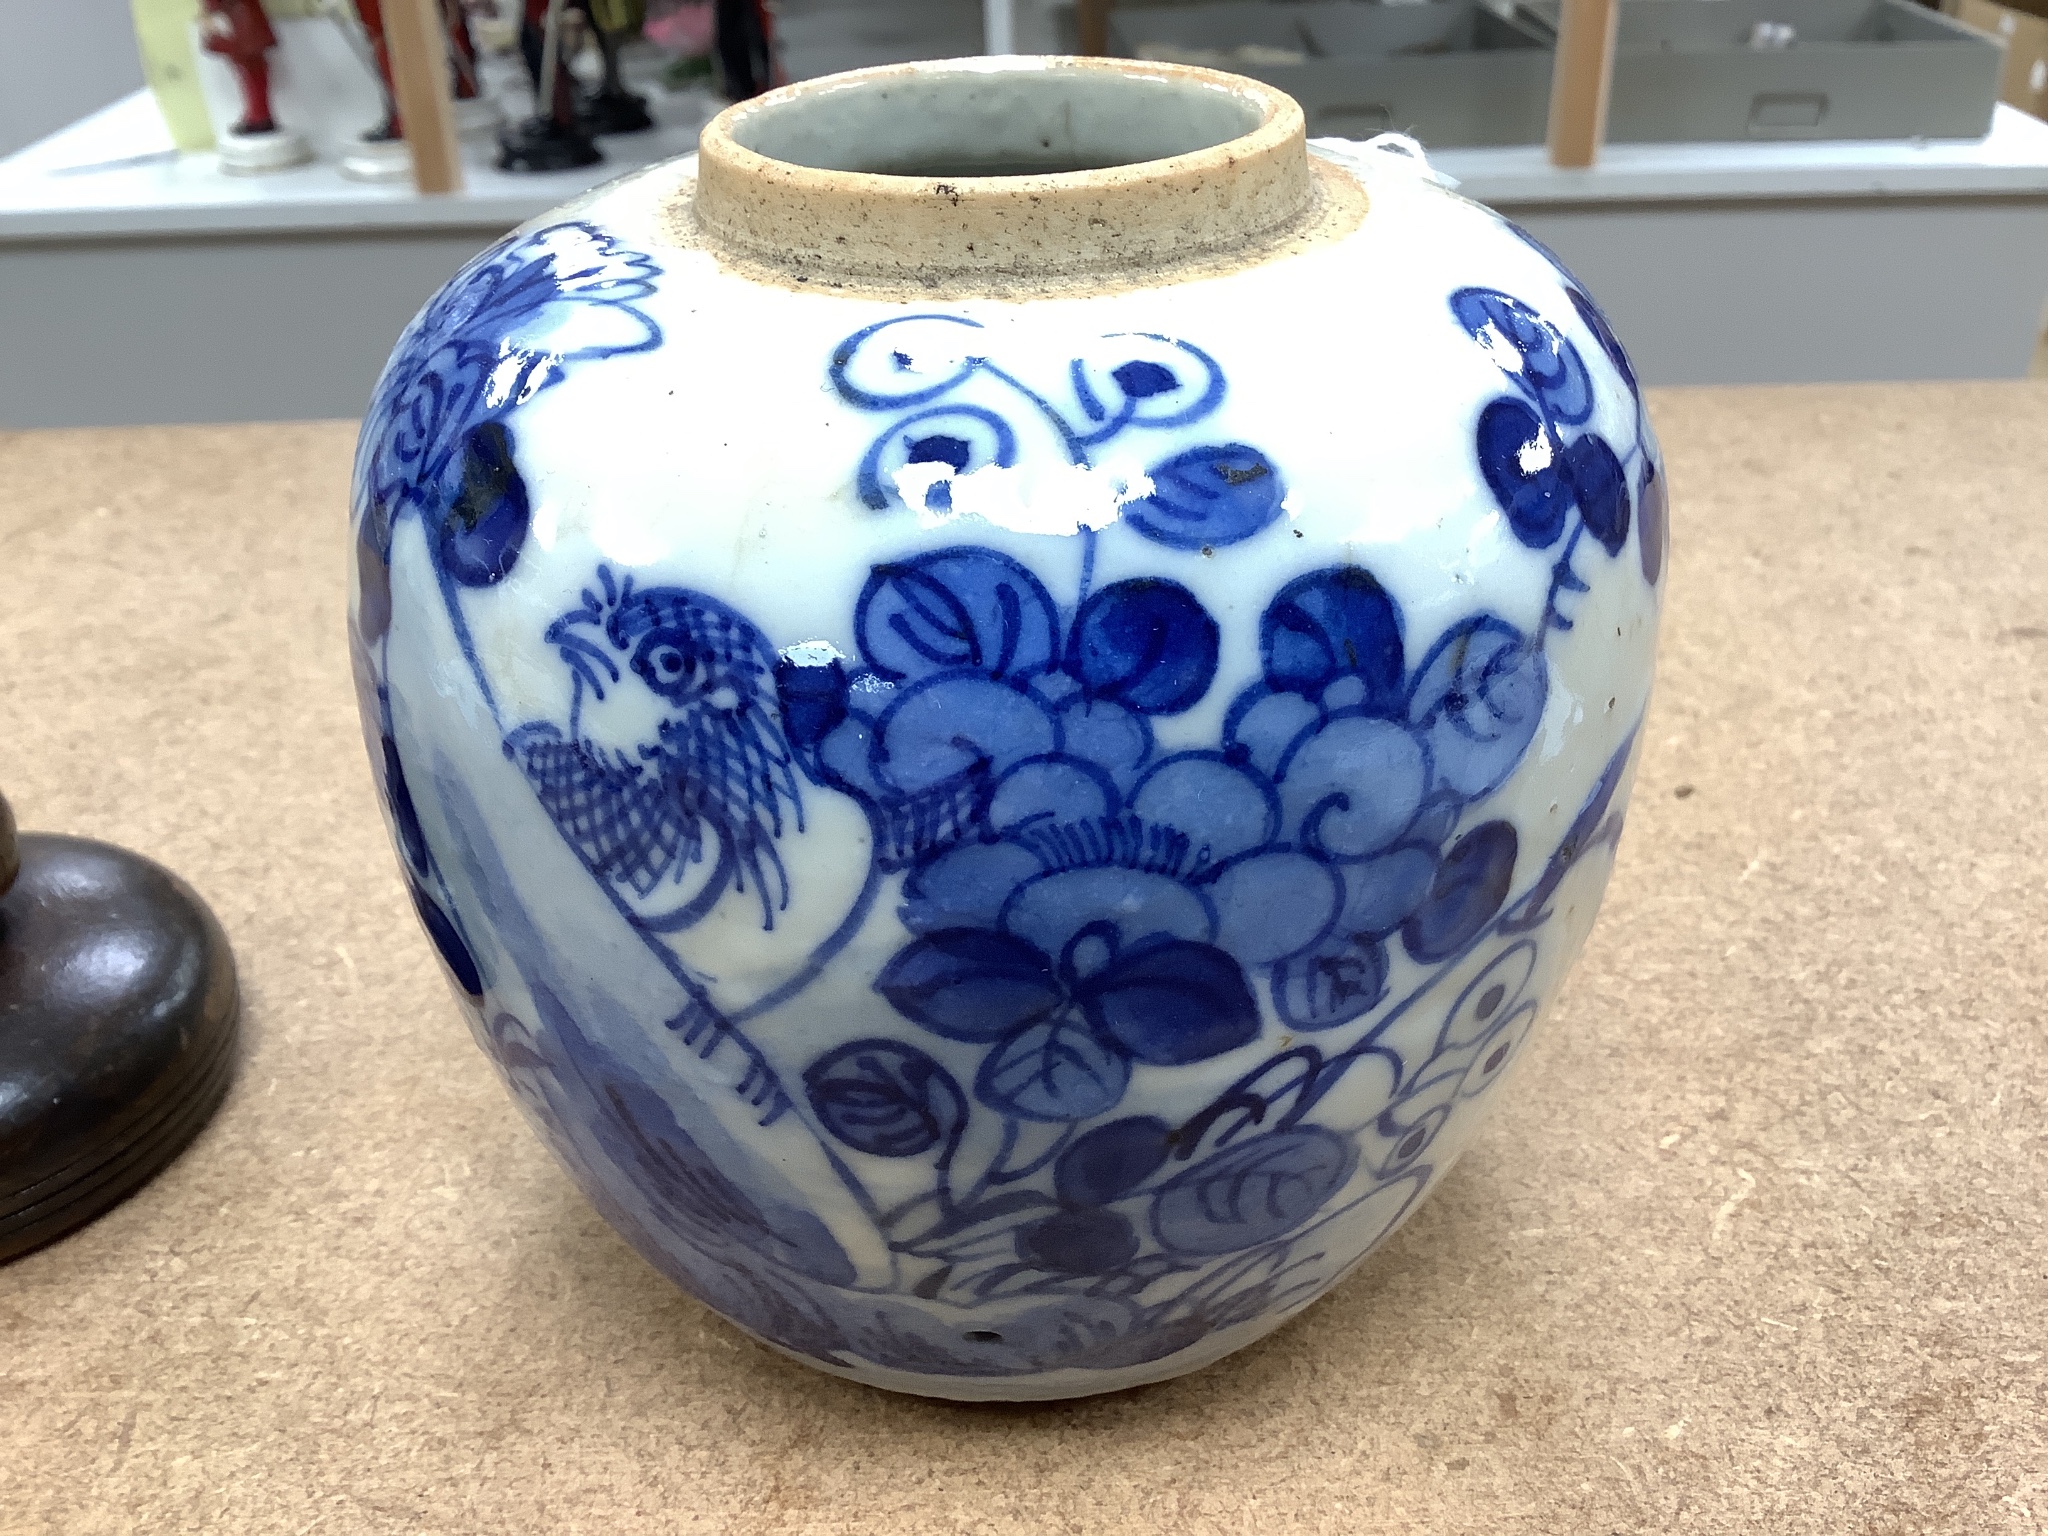 A Chinese blue and white crackle glaze jar and cover, early 20th century, height 12cm (excluding cover)